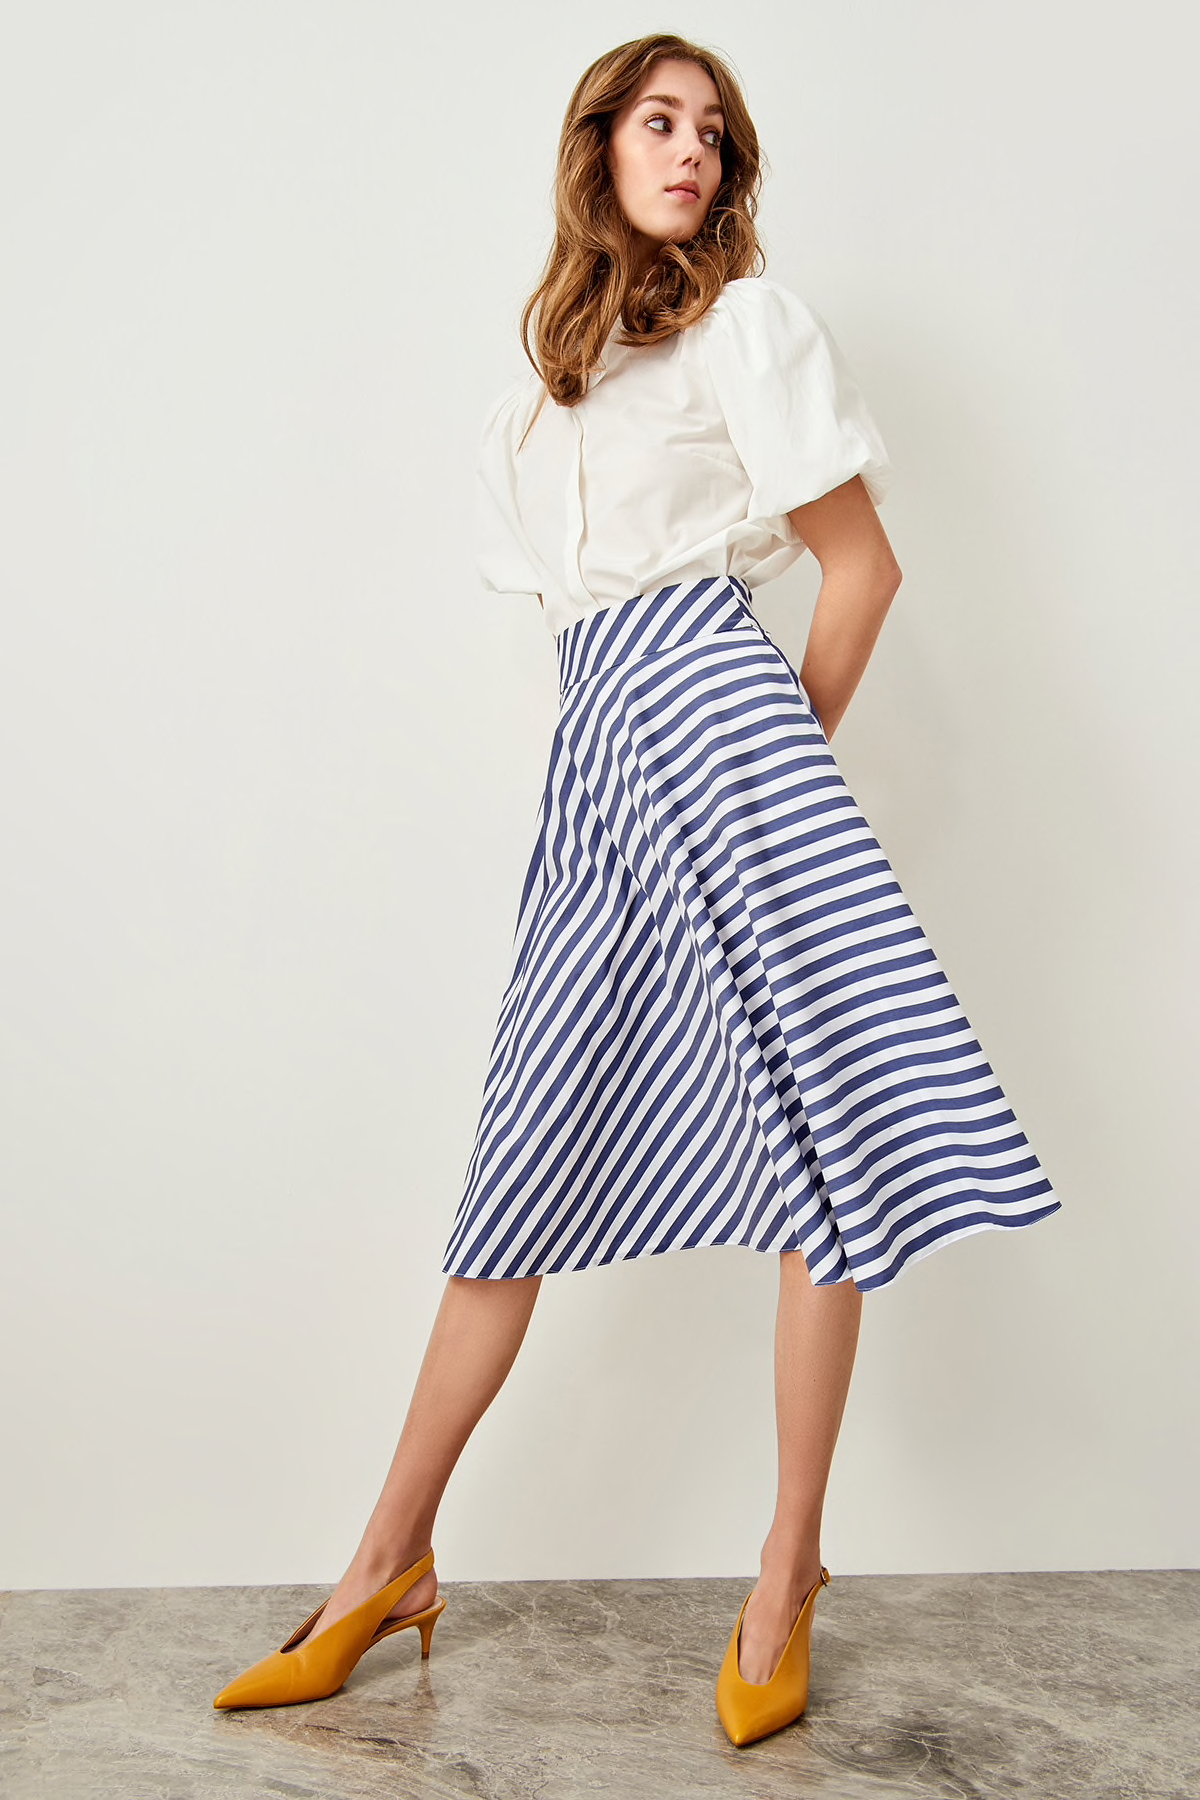 White Striped Skirt | Style Limits